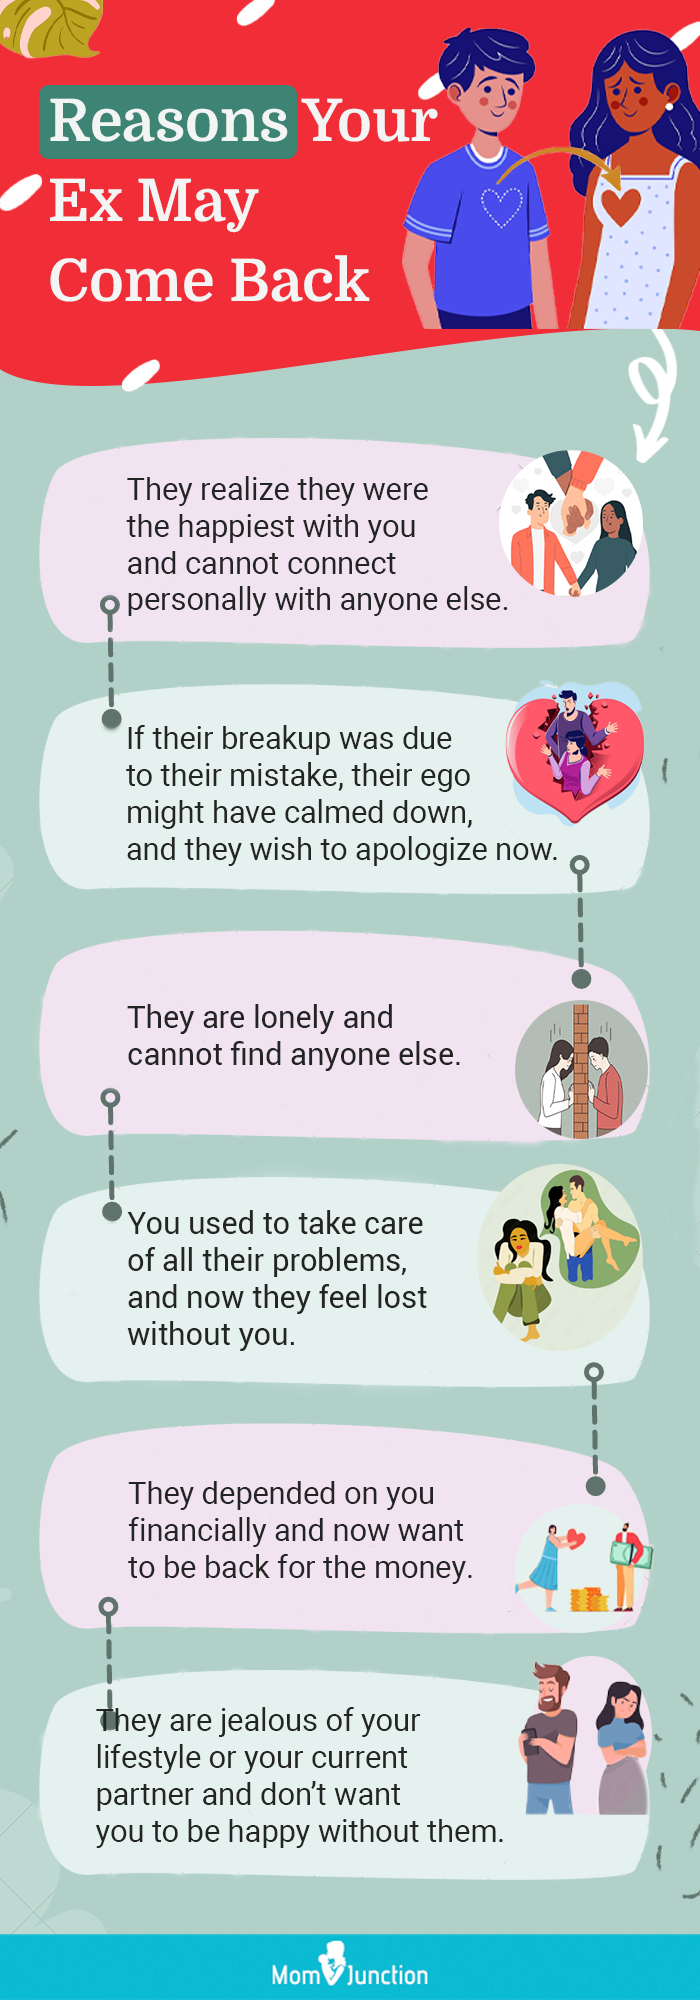 reasons your ex may come back (infographic)